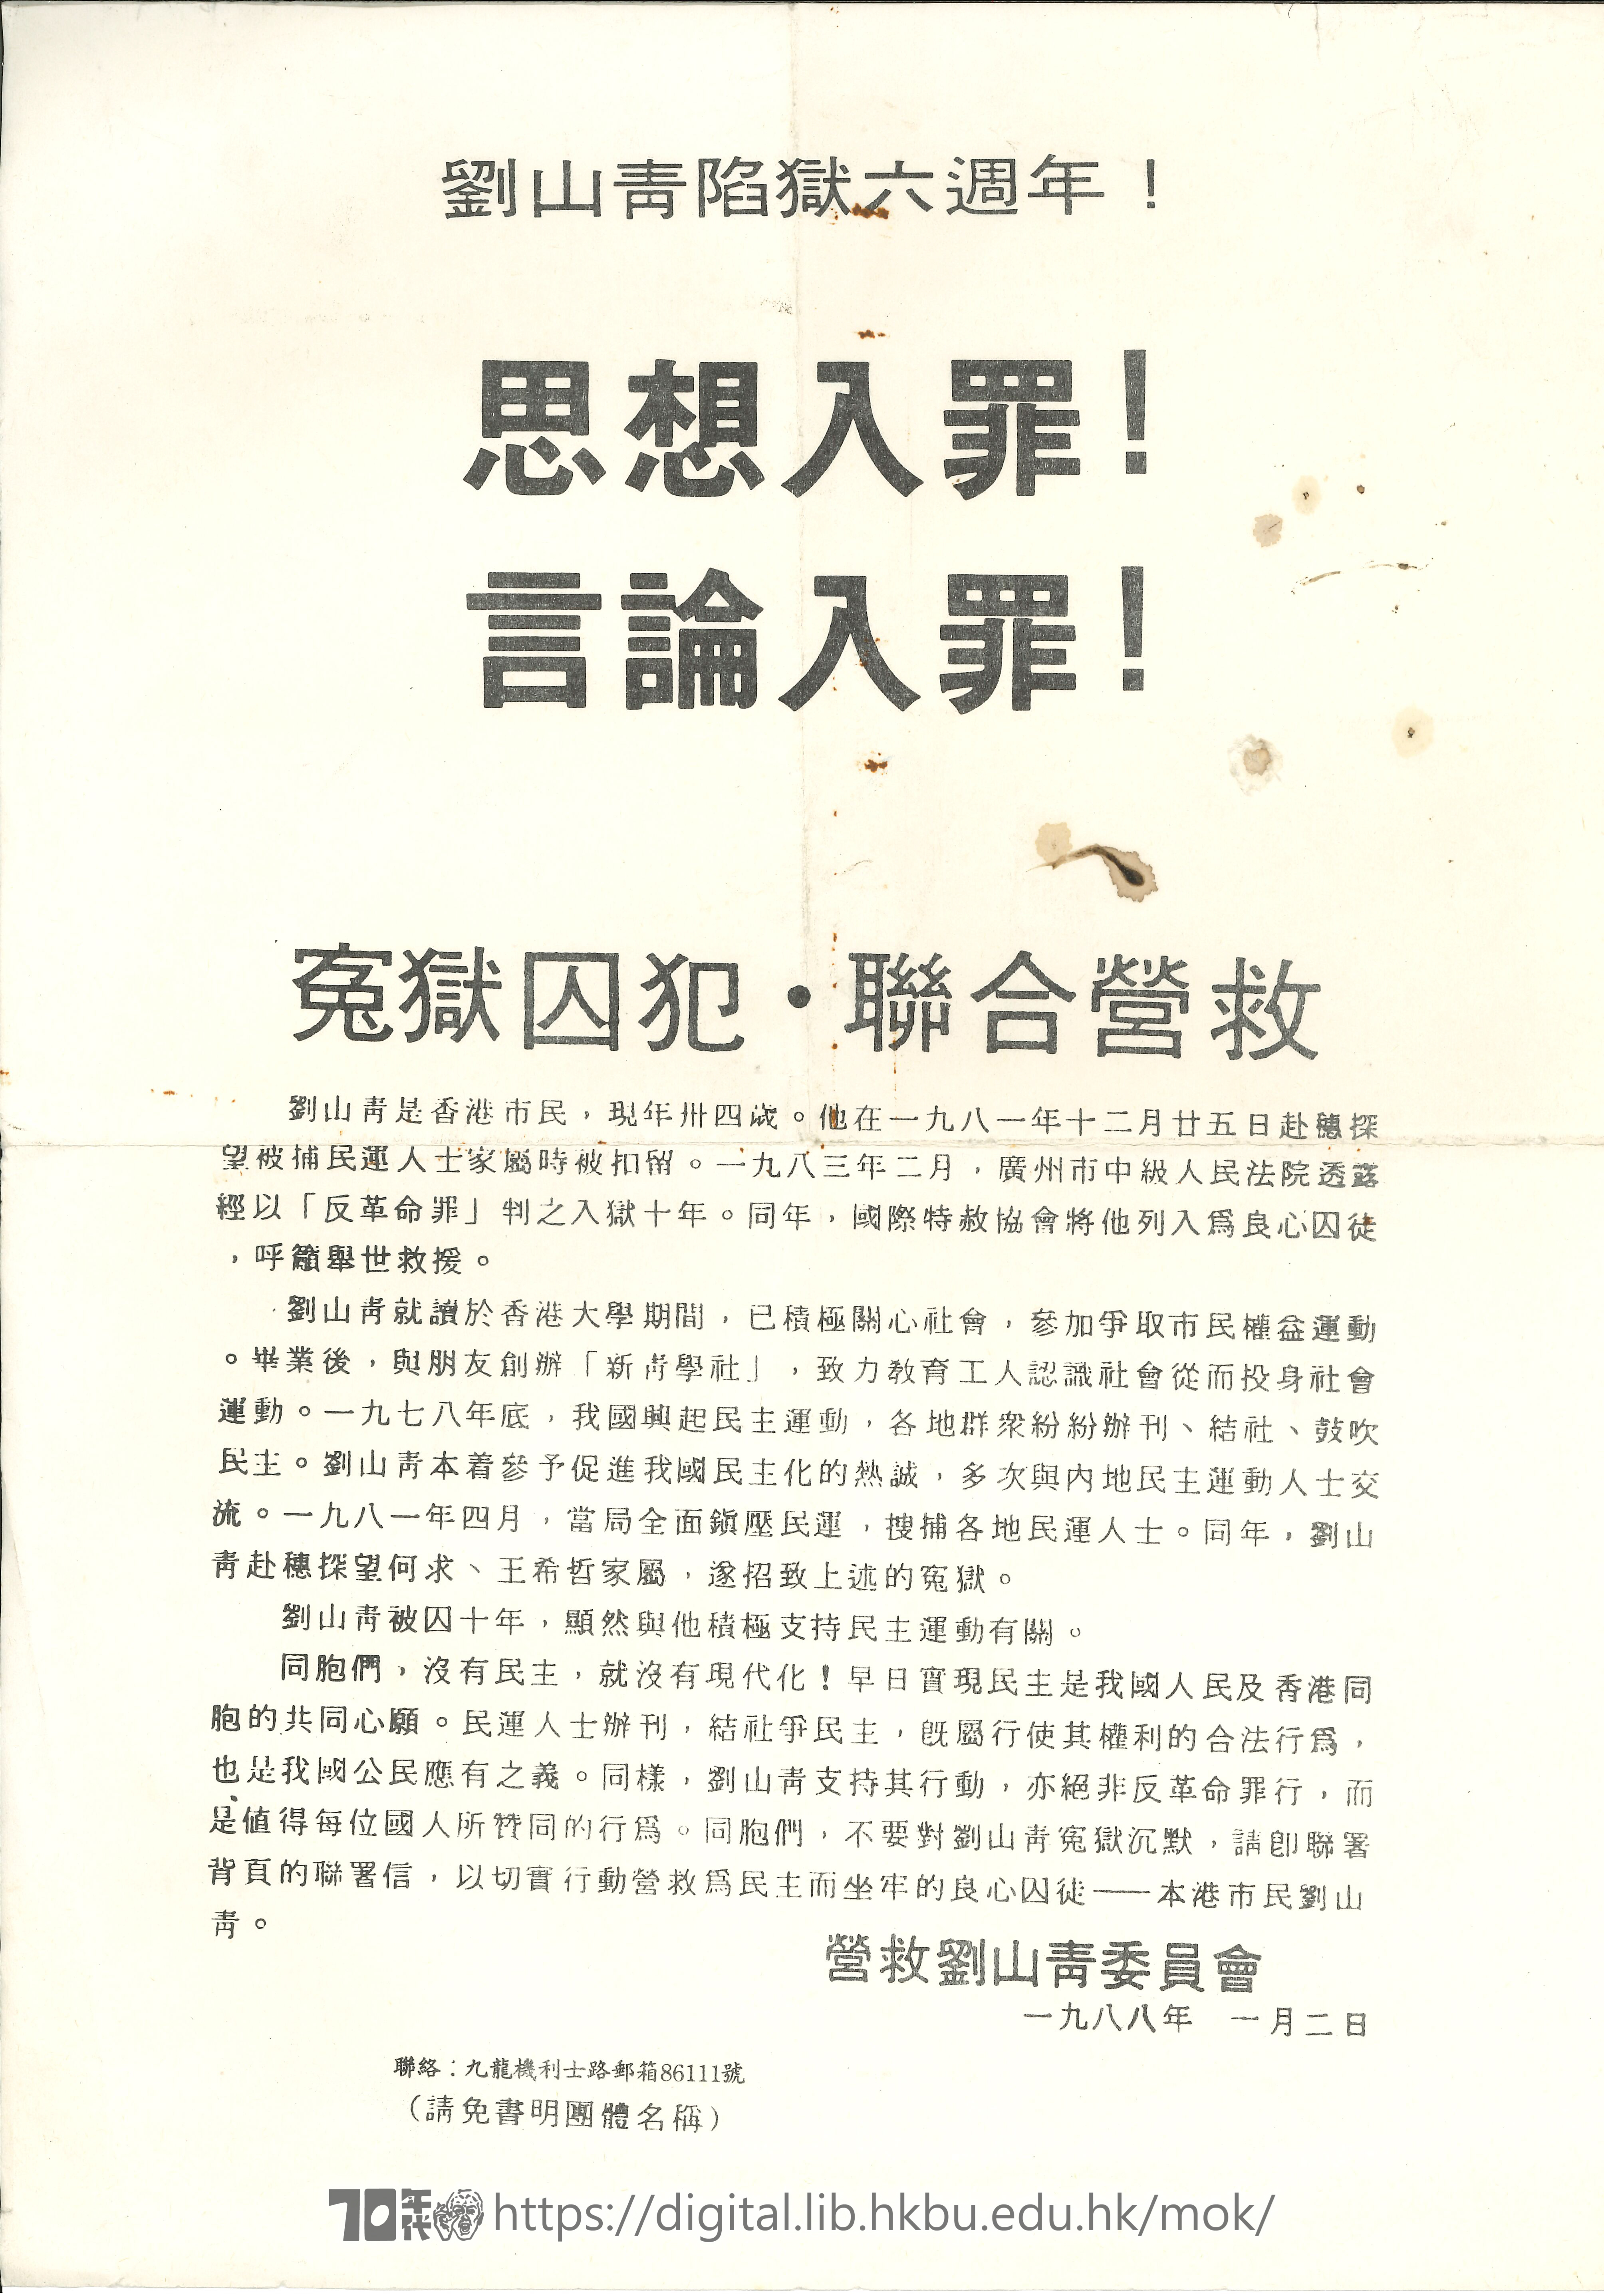   Flyer of signature campaign - Free Lau Shan-ching  